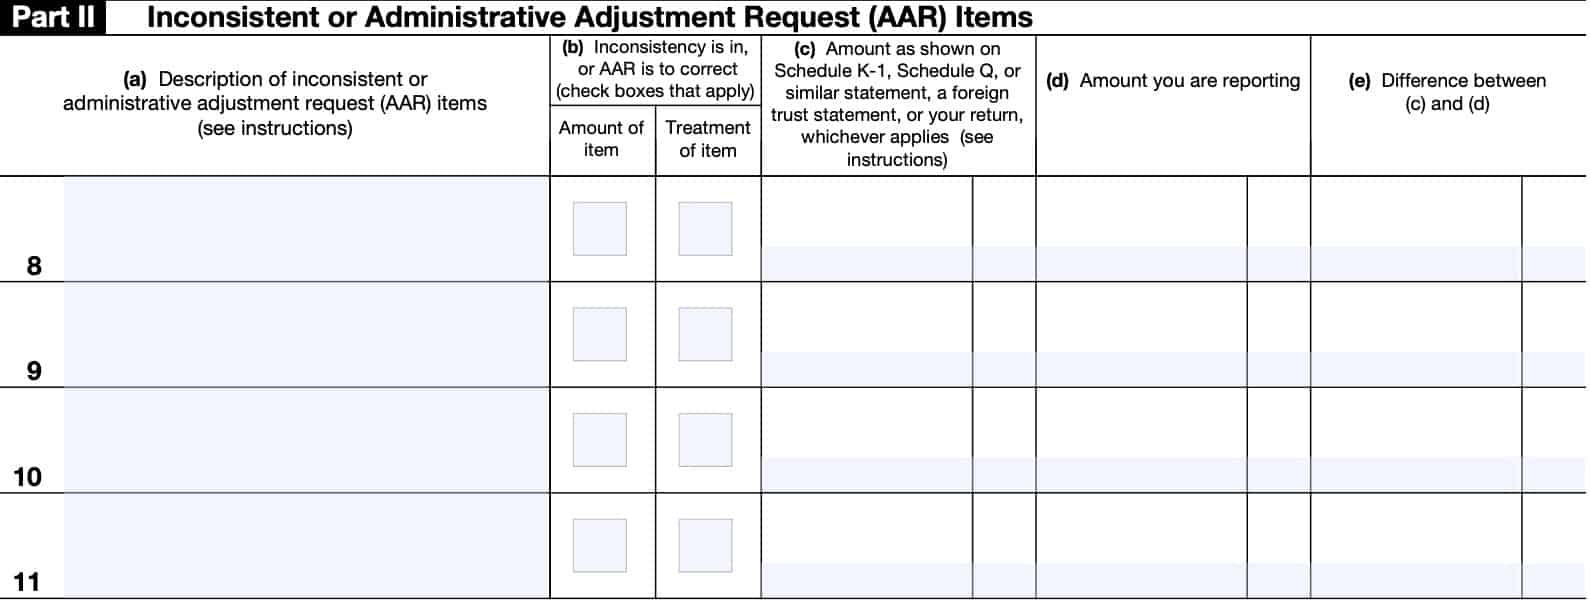 part II, inconsistent or administrative request (AAR) items